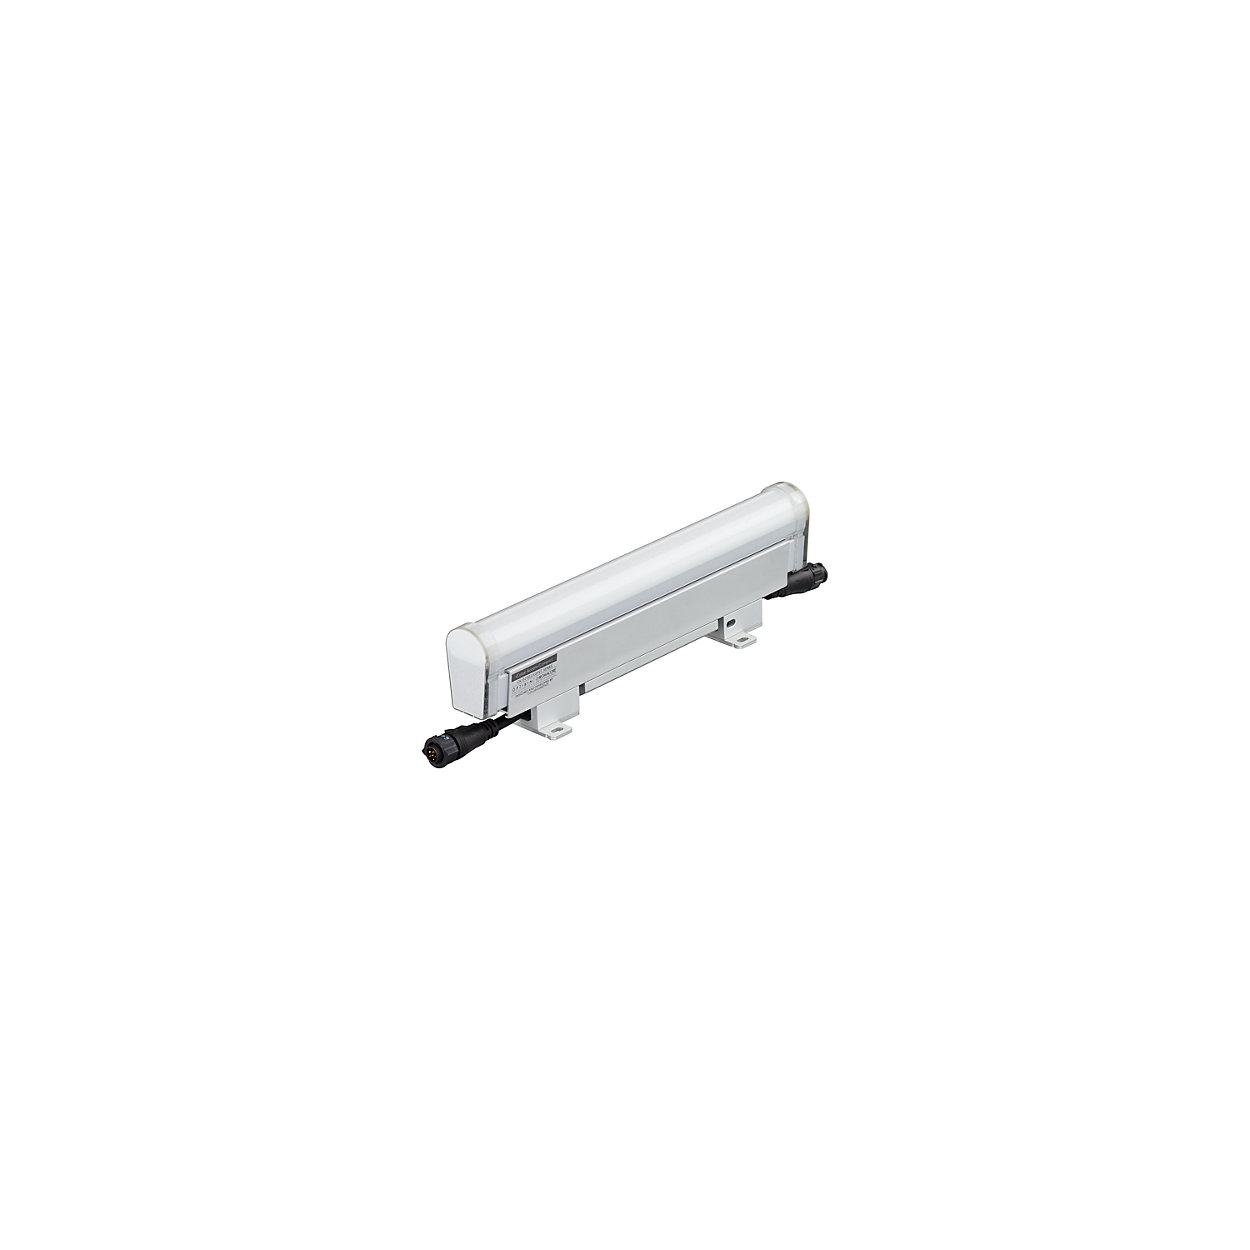 iColor Accent Compact - High resolution media direct view linear LED luminaire with intelligent color light